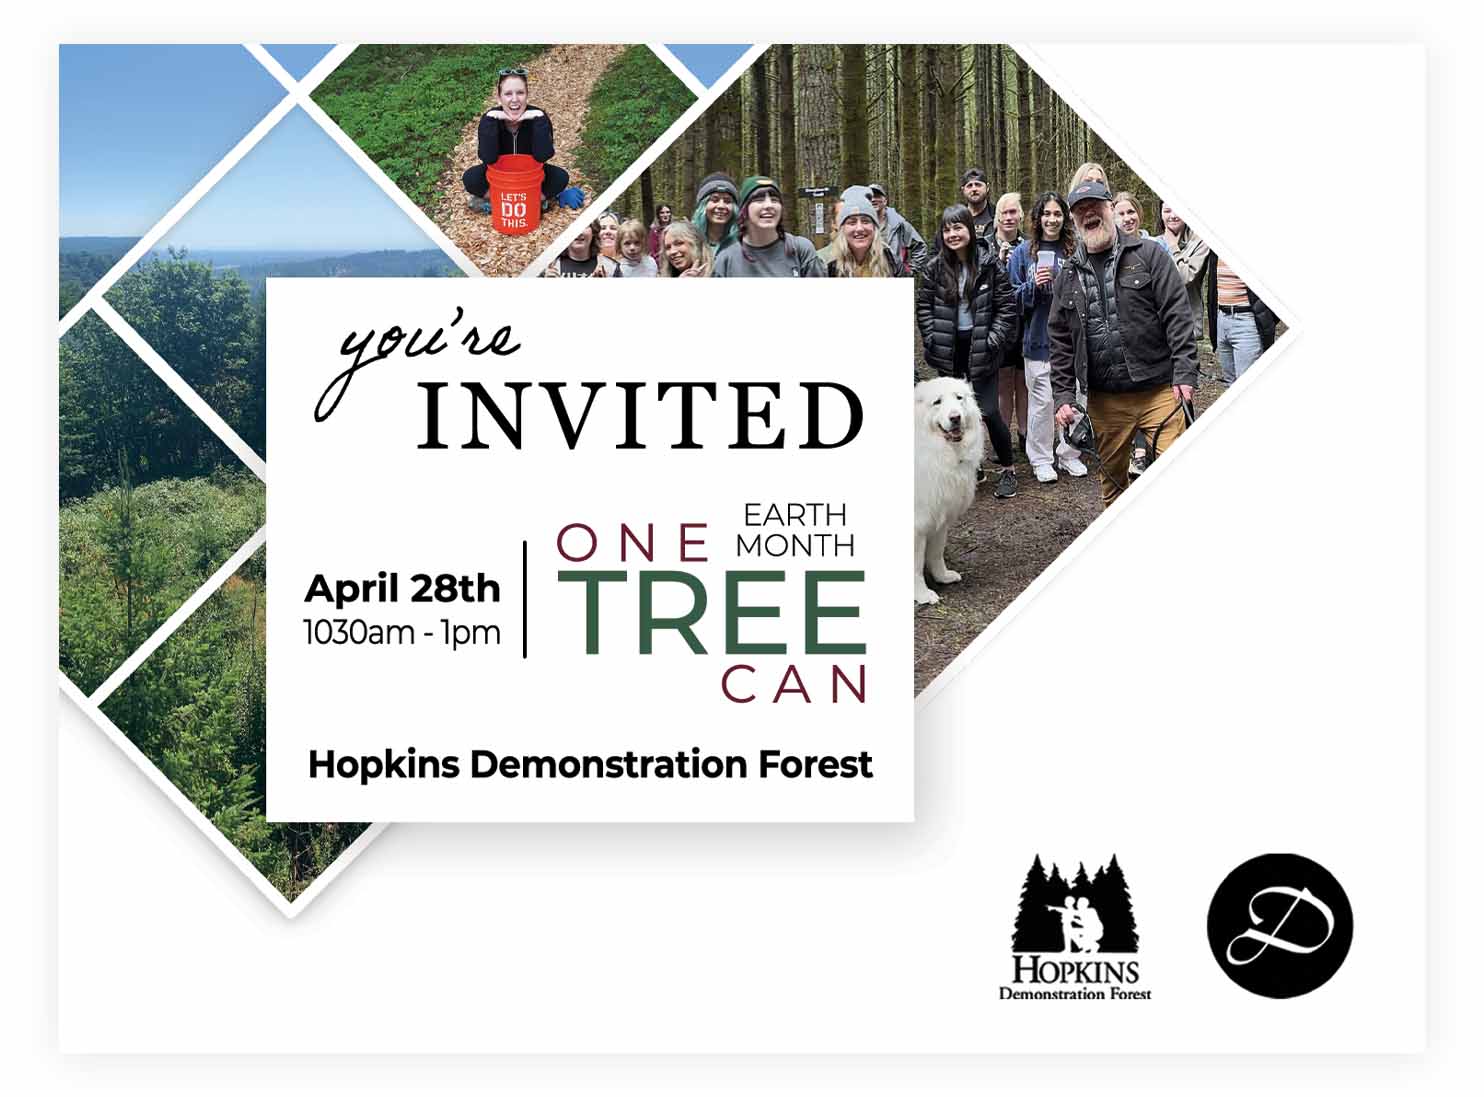 Image of dosha earth month event invite at Hopkins demonstration forest on 4/28/24 from 1030am - 1pm